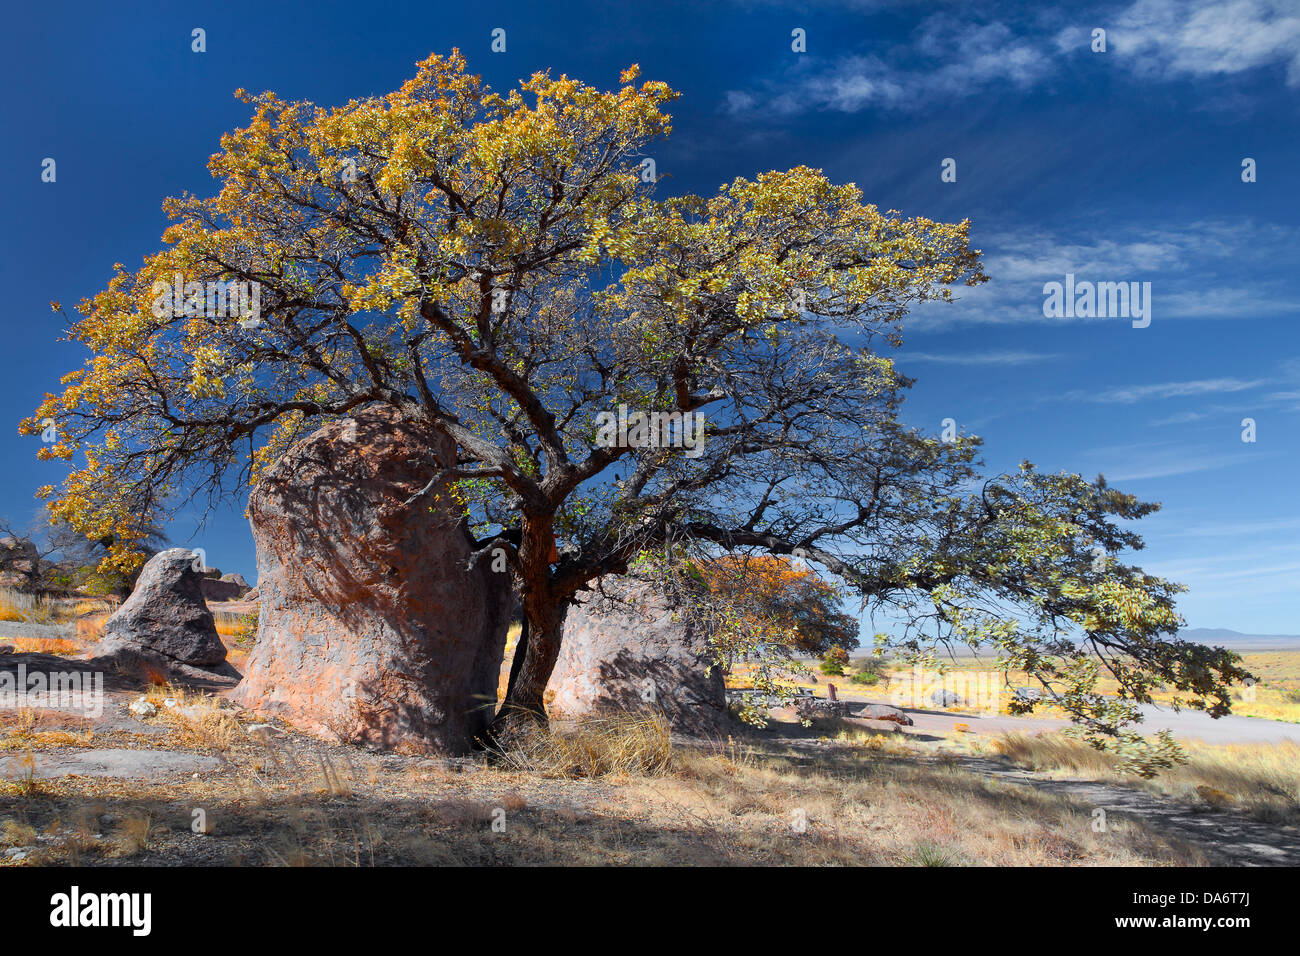 USA, United States, America, New Mexico, Deming, Southwest, American, City of Rocks, tree, large rocks, rocks, boulders, rolly g Stock Photo